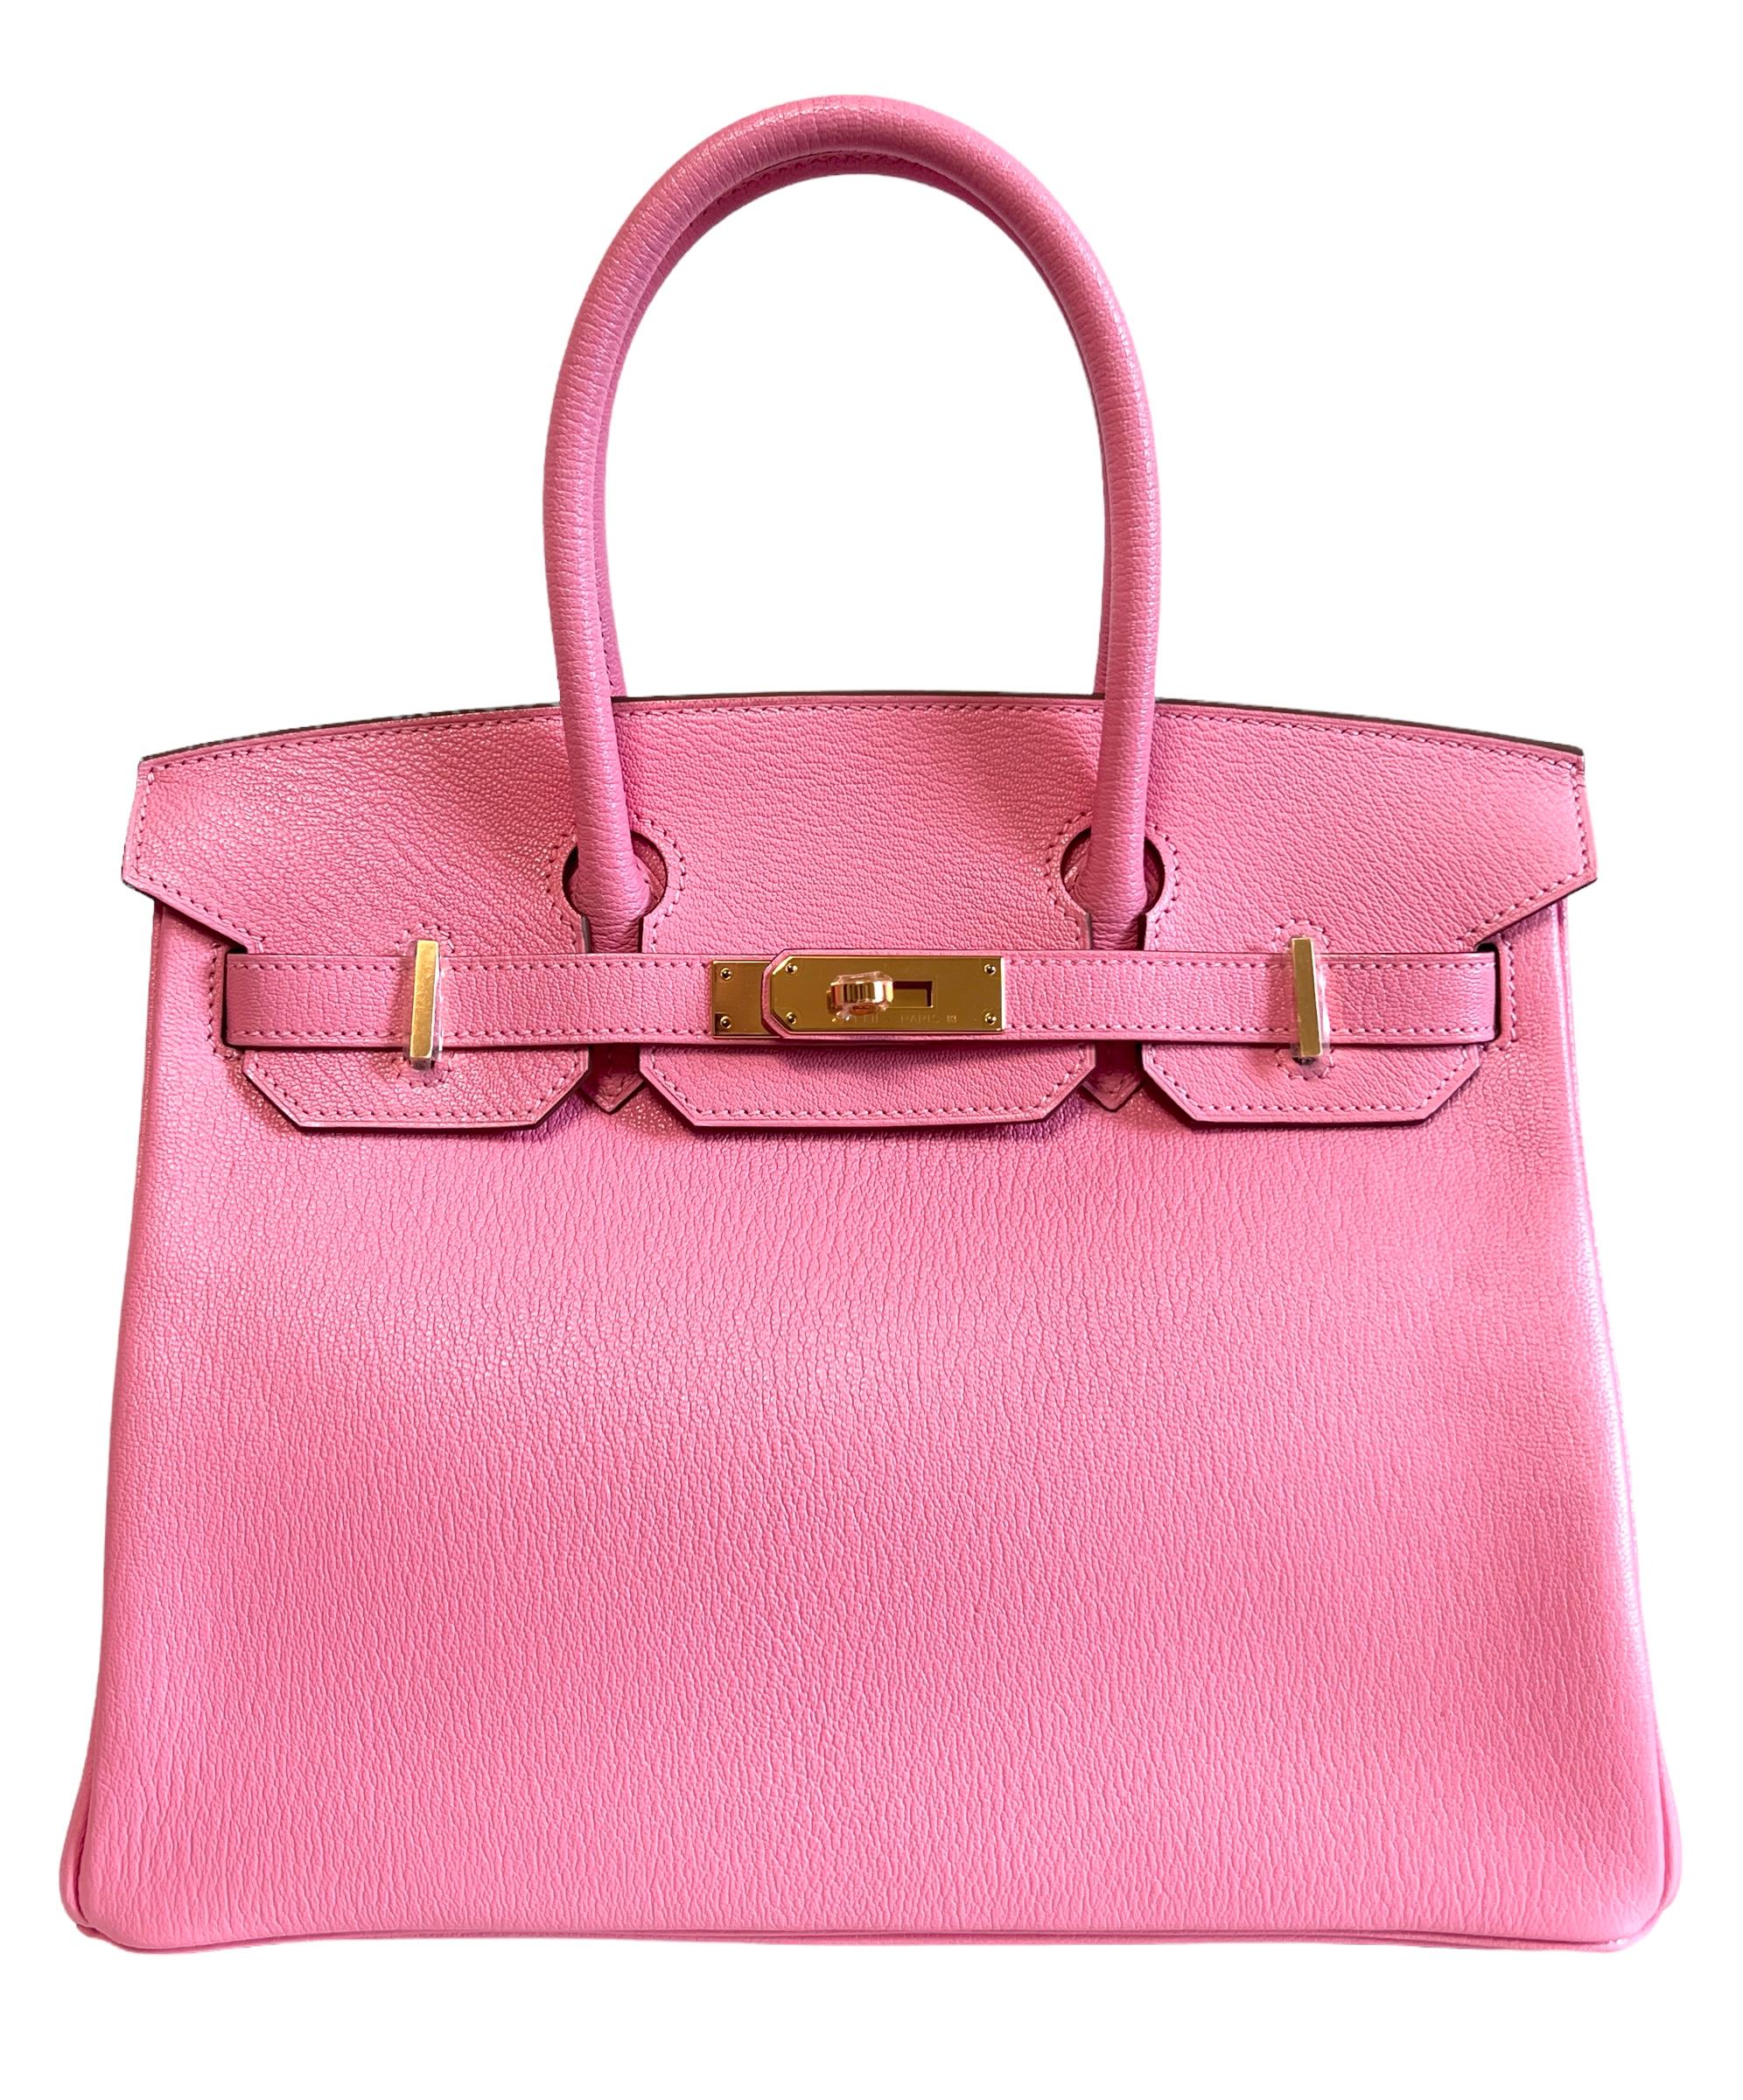 Stunning Ultra Rare Only one for sale on the market! Hermes Birkin 30 Rose Confetti Pink Chèvre Leather Gold Hardware. As new uncarried with Plastic on all Hardware and feet. 

Shop with confidence from Lux Addicts. Authenticity Guaranteed!